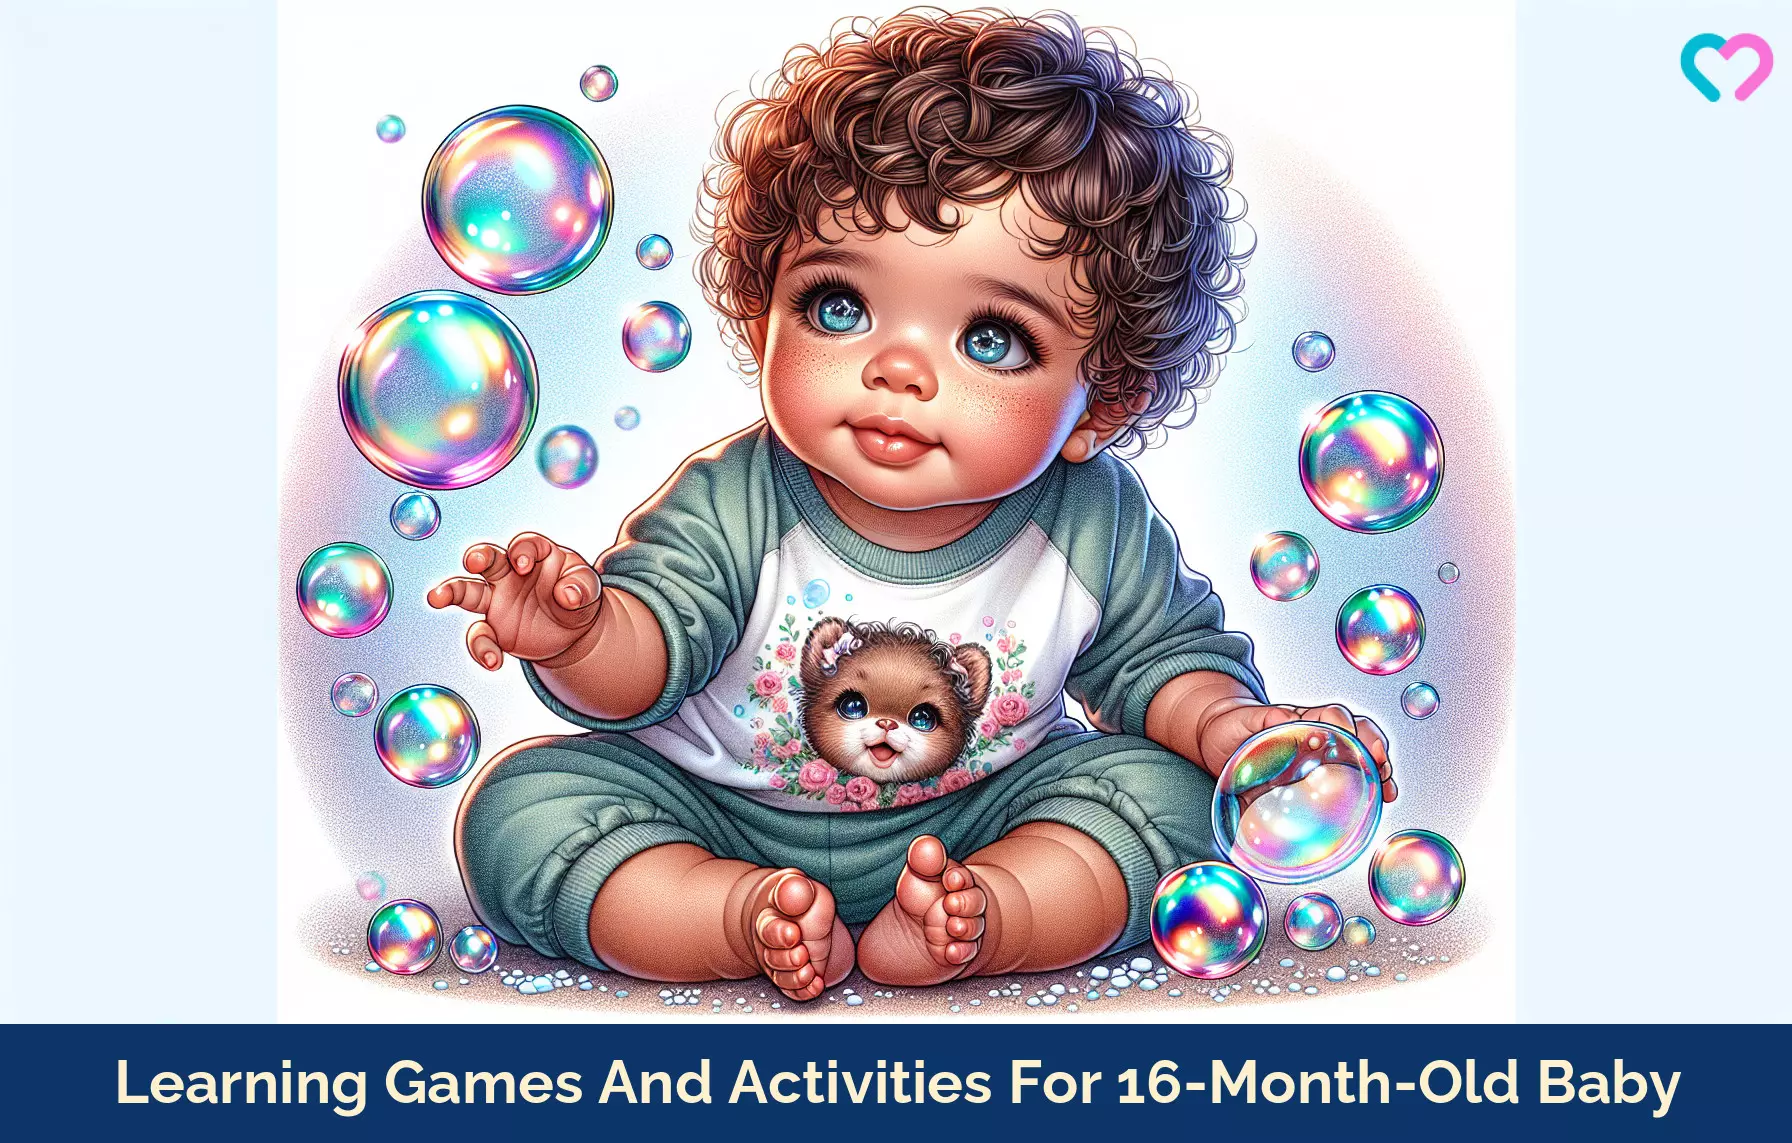 Activities For 16-Month-Old Baby_illustration